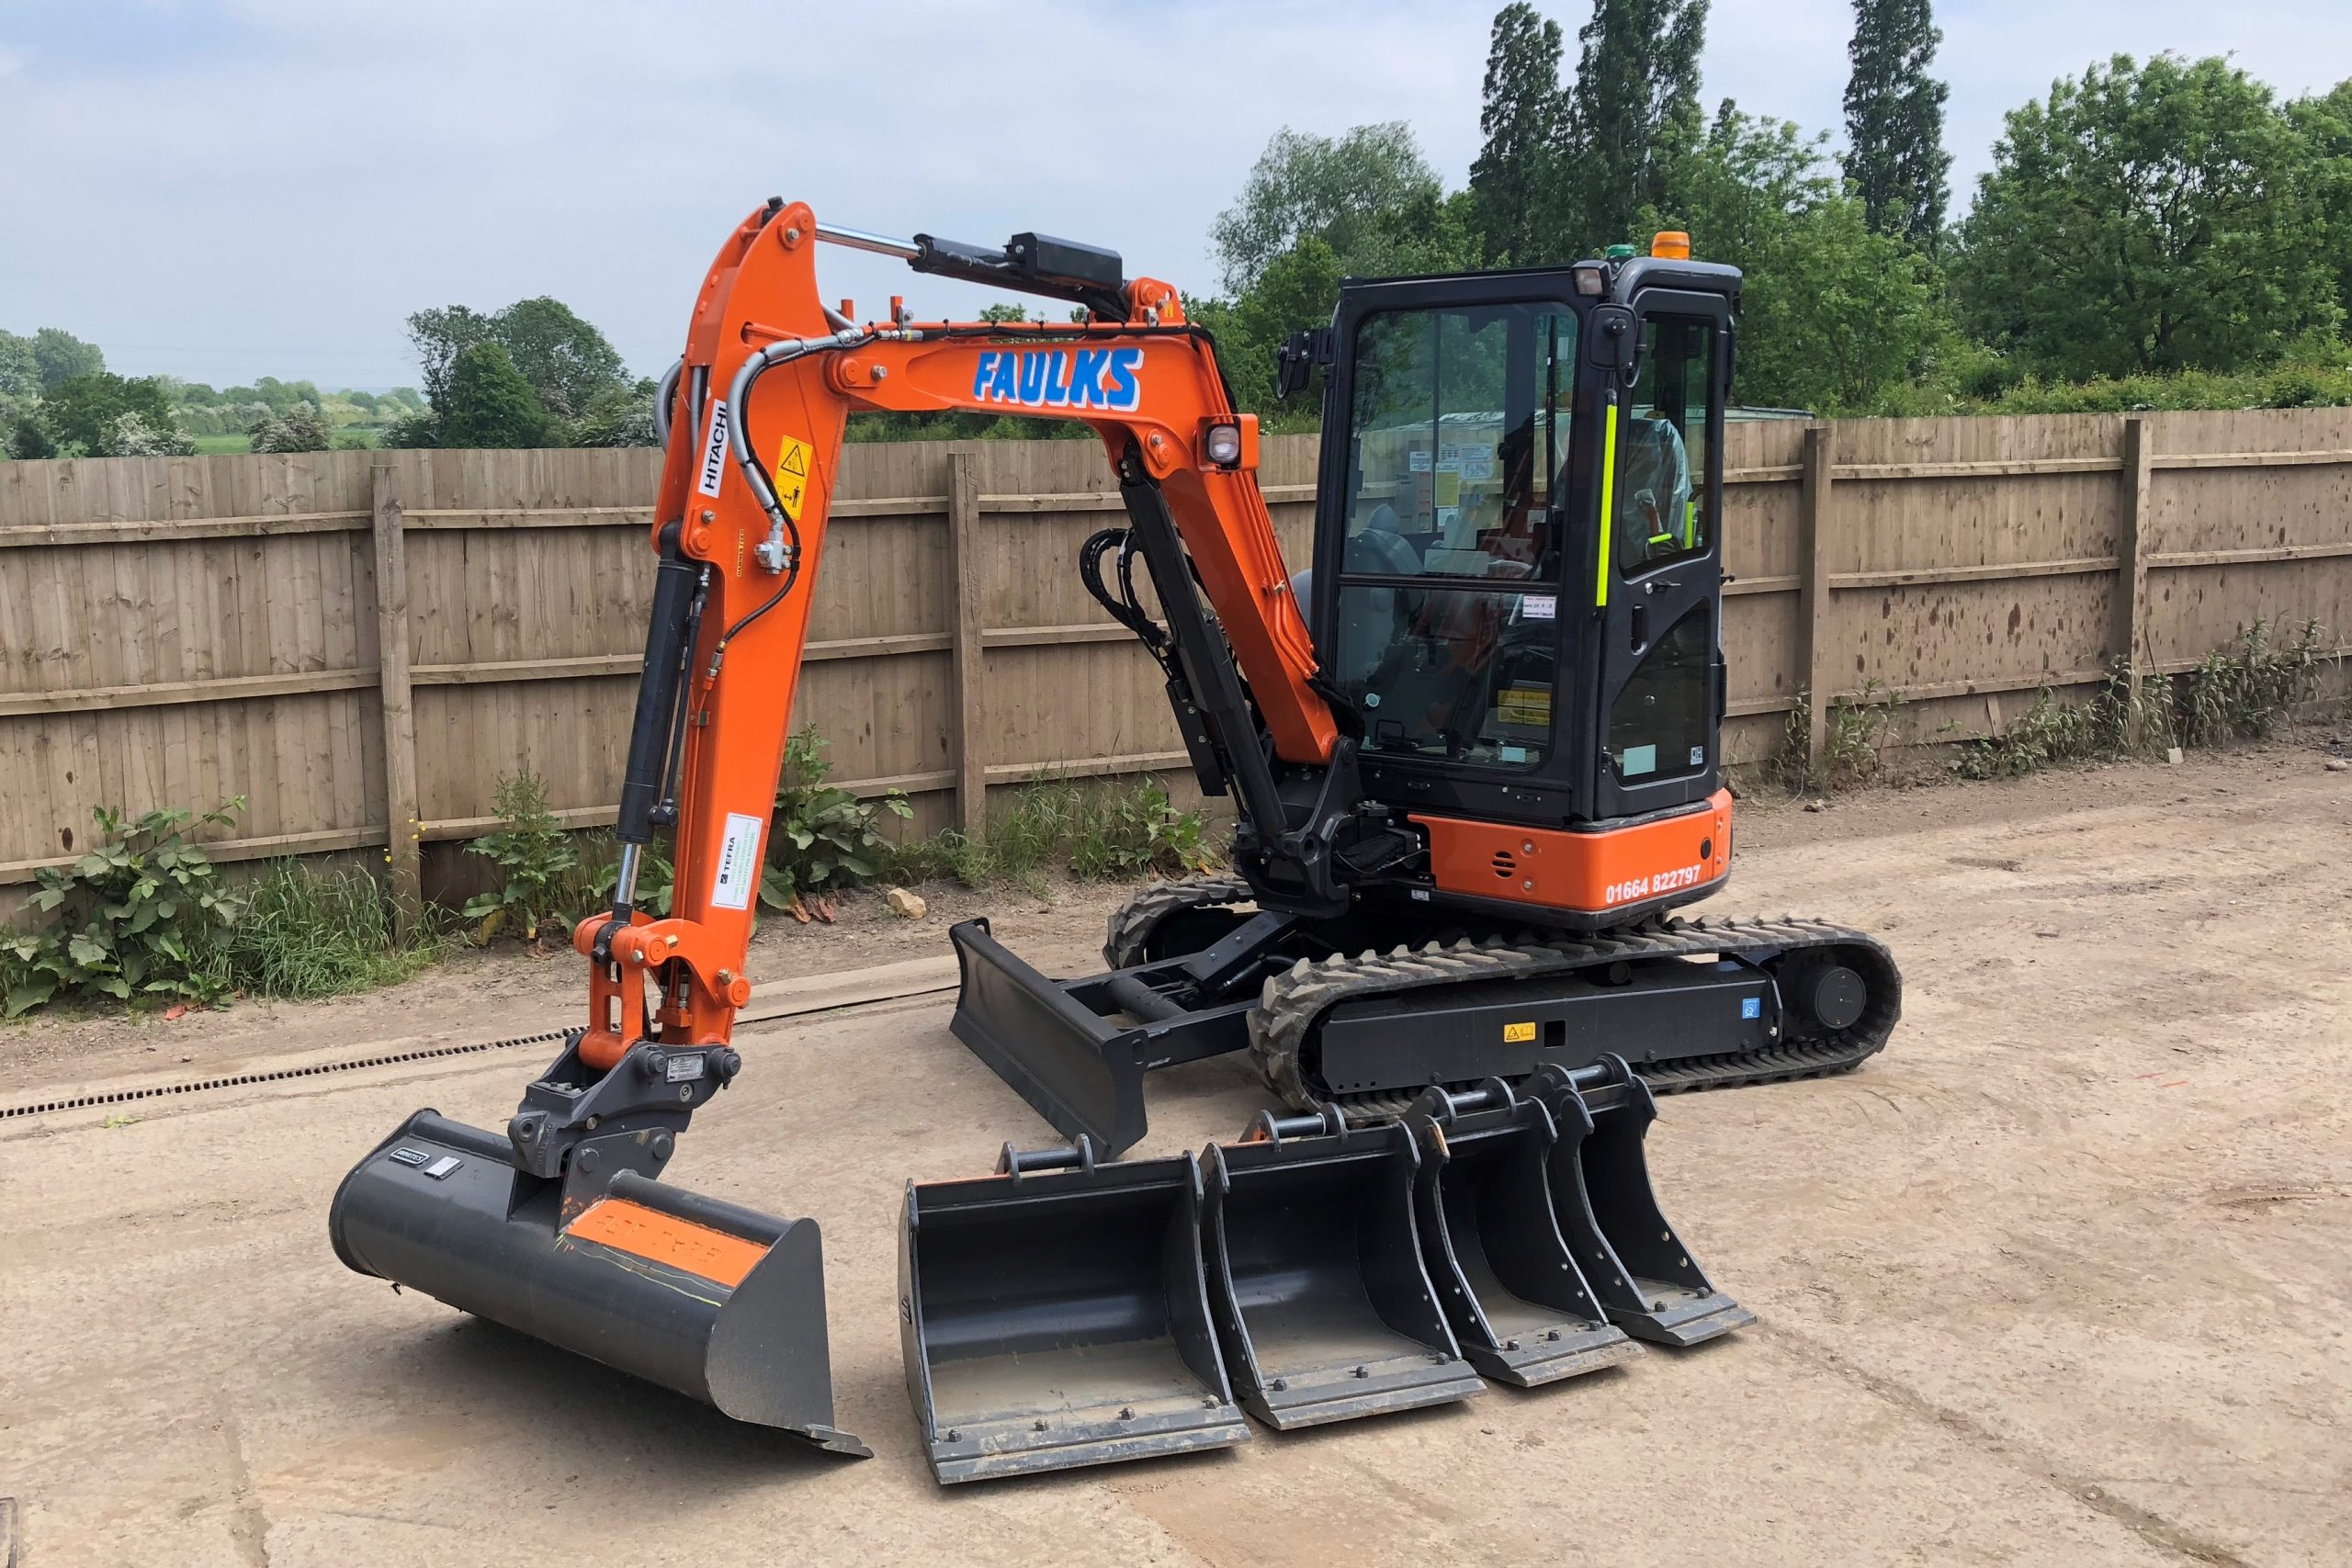 The Hitachi ZX33 tracked excavator in car park with digger head options lined up